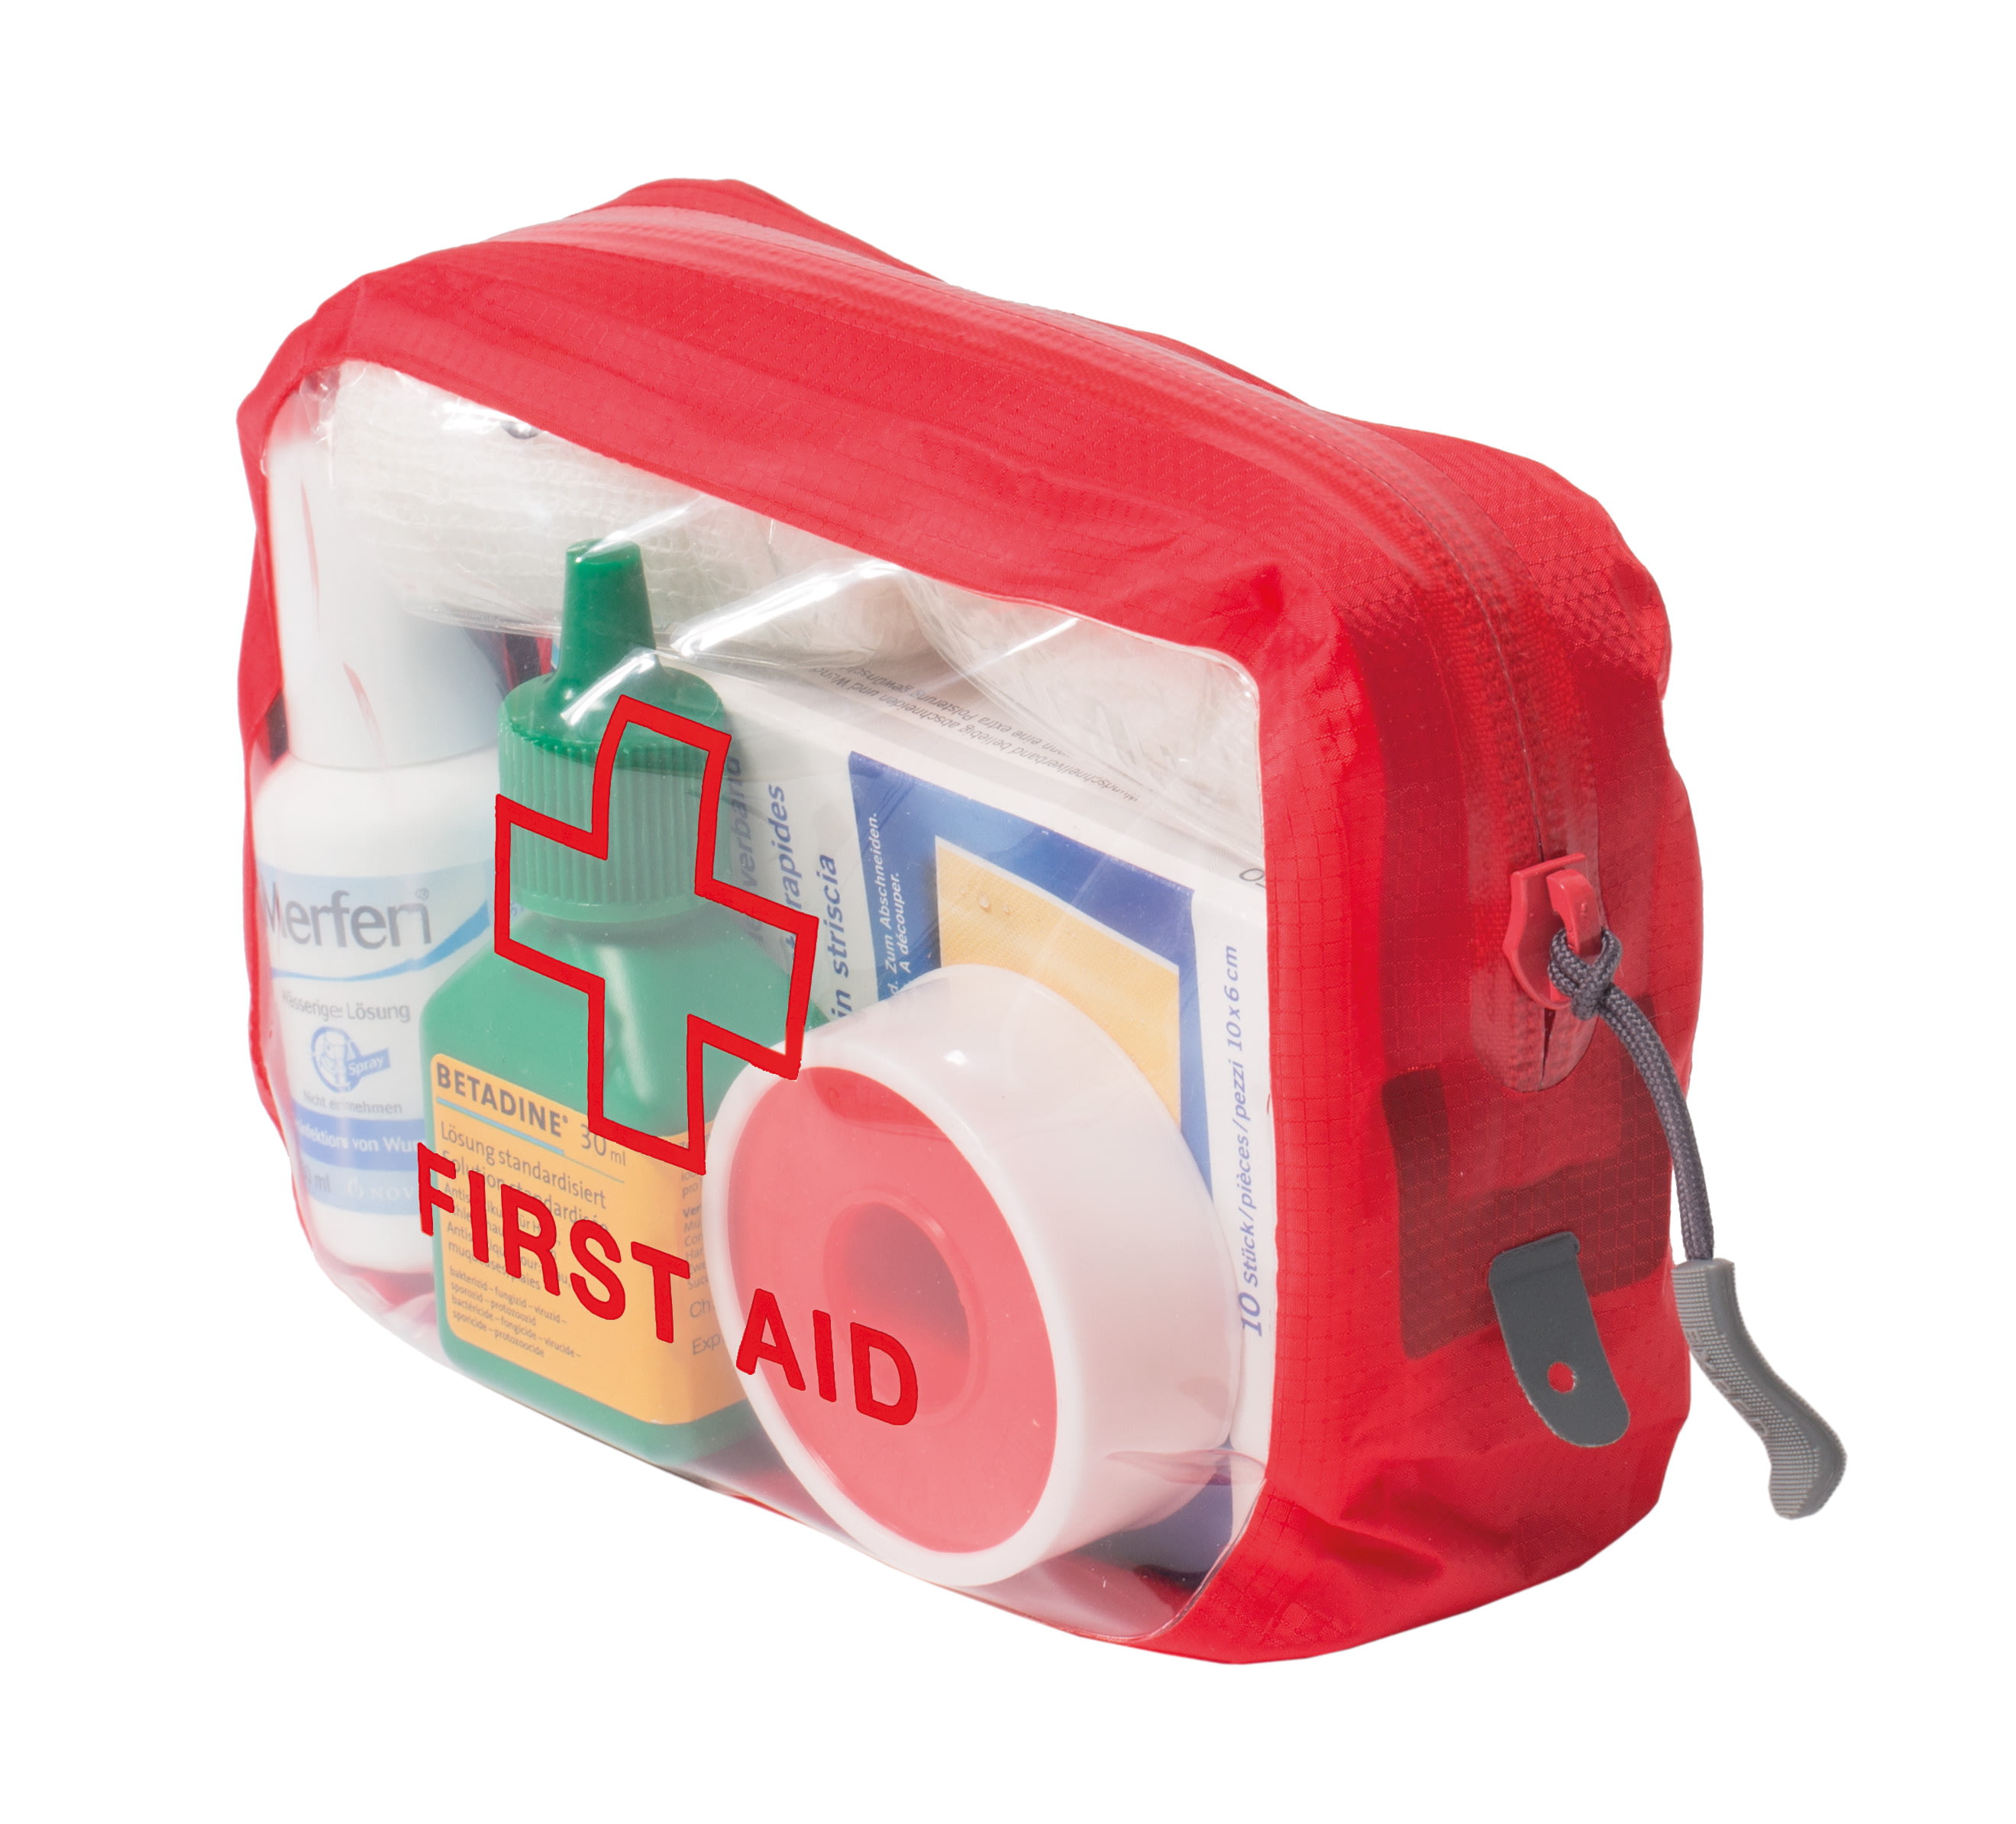 First Aid Kit for Skiing